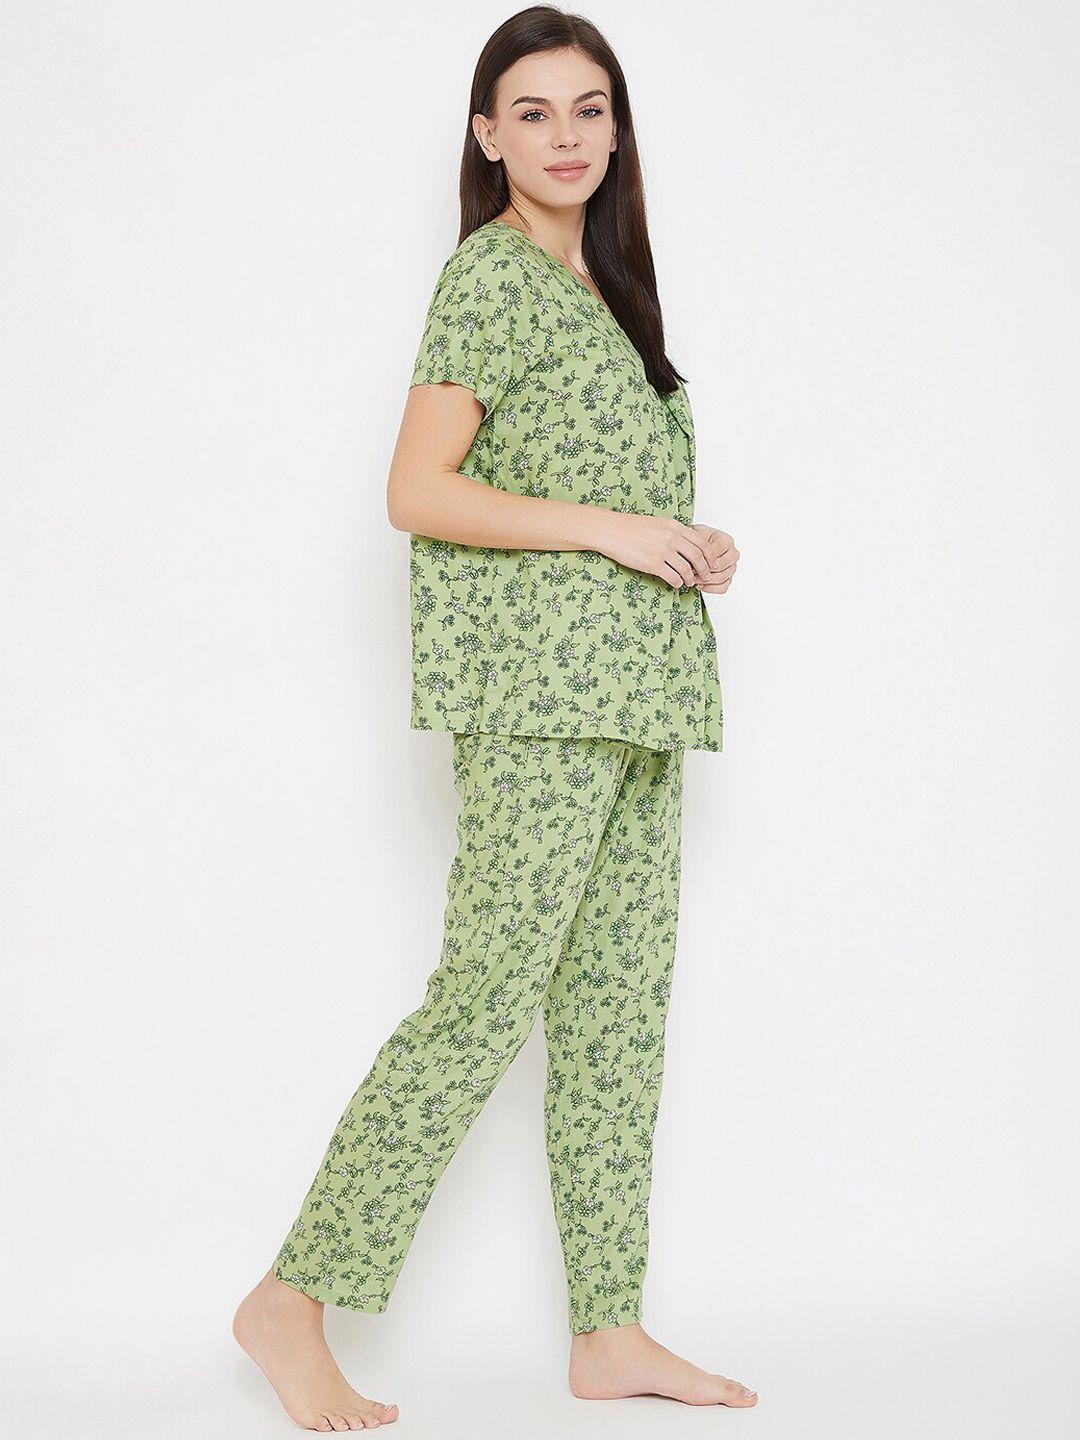 clovia women green & white floral printed maternity night suit